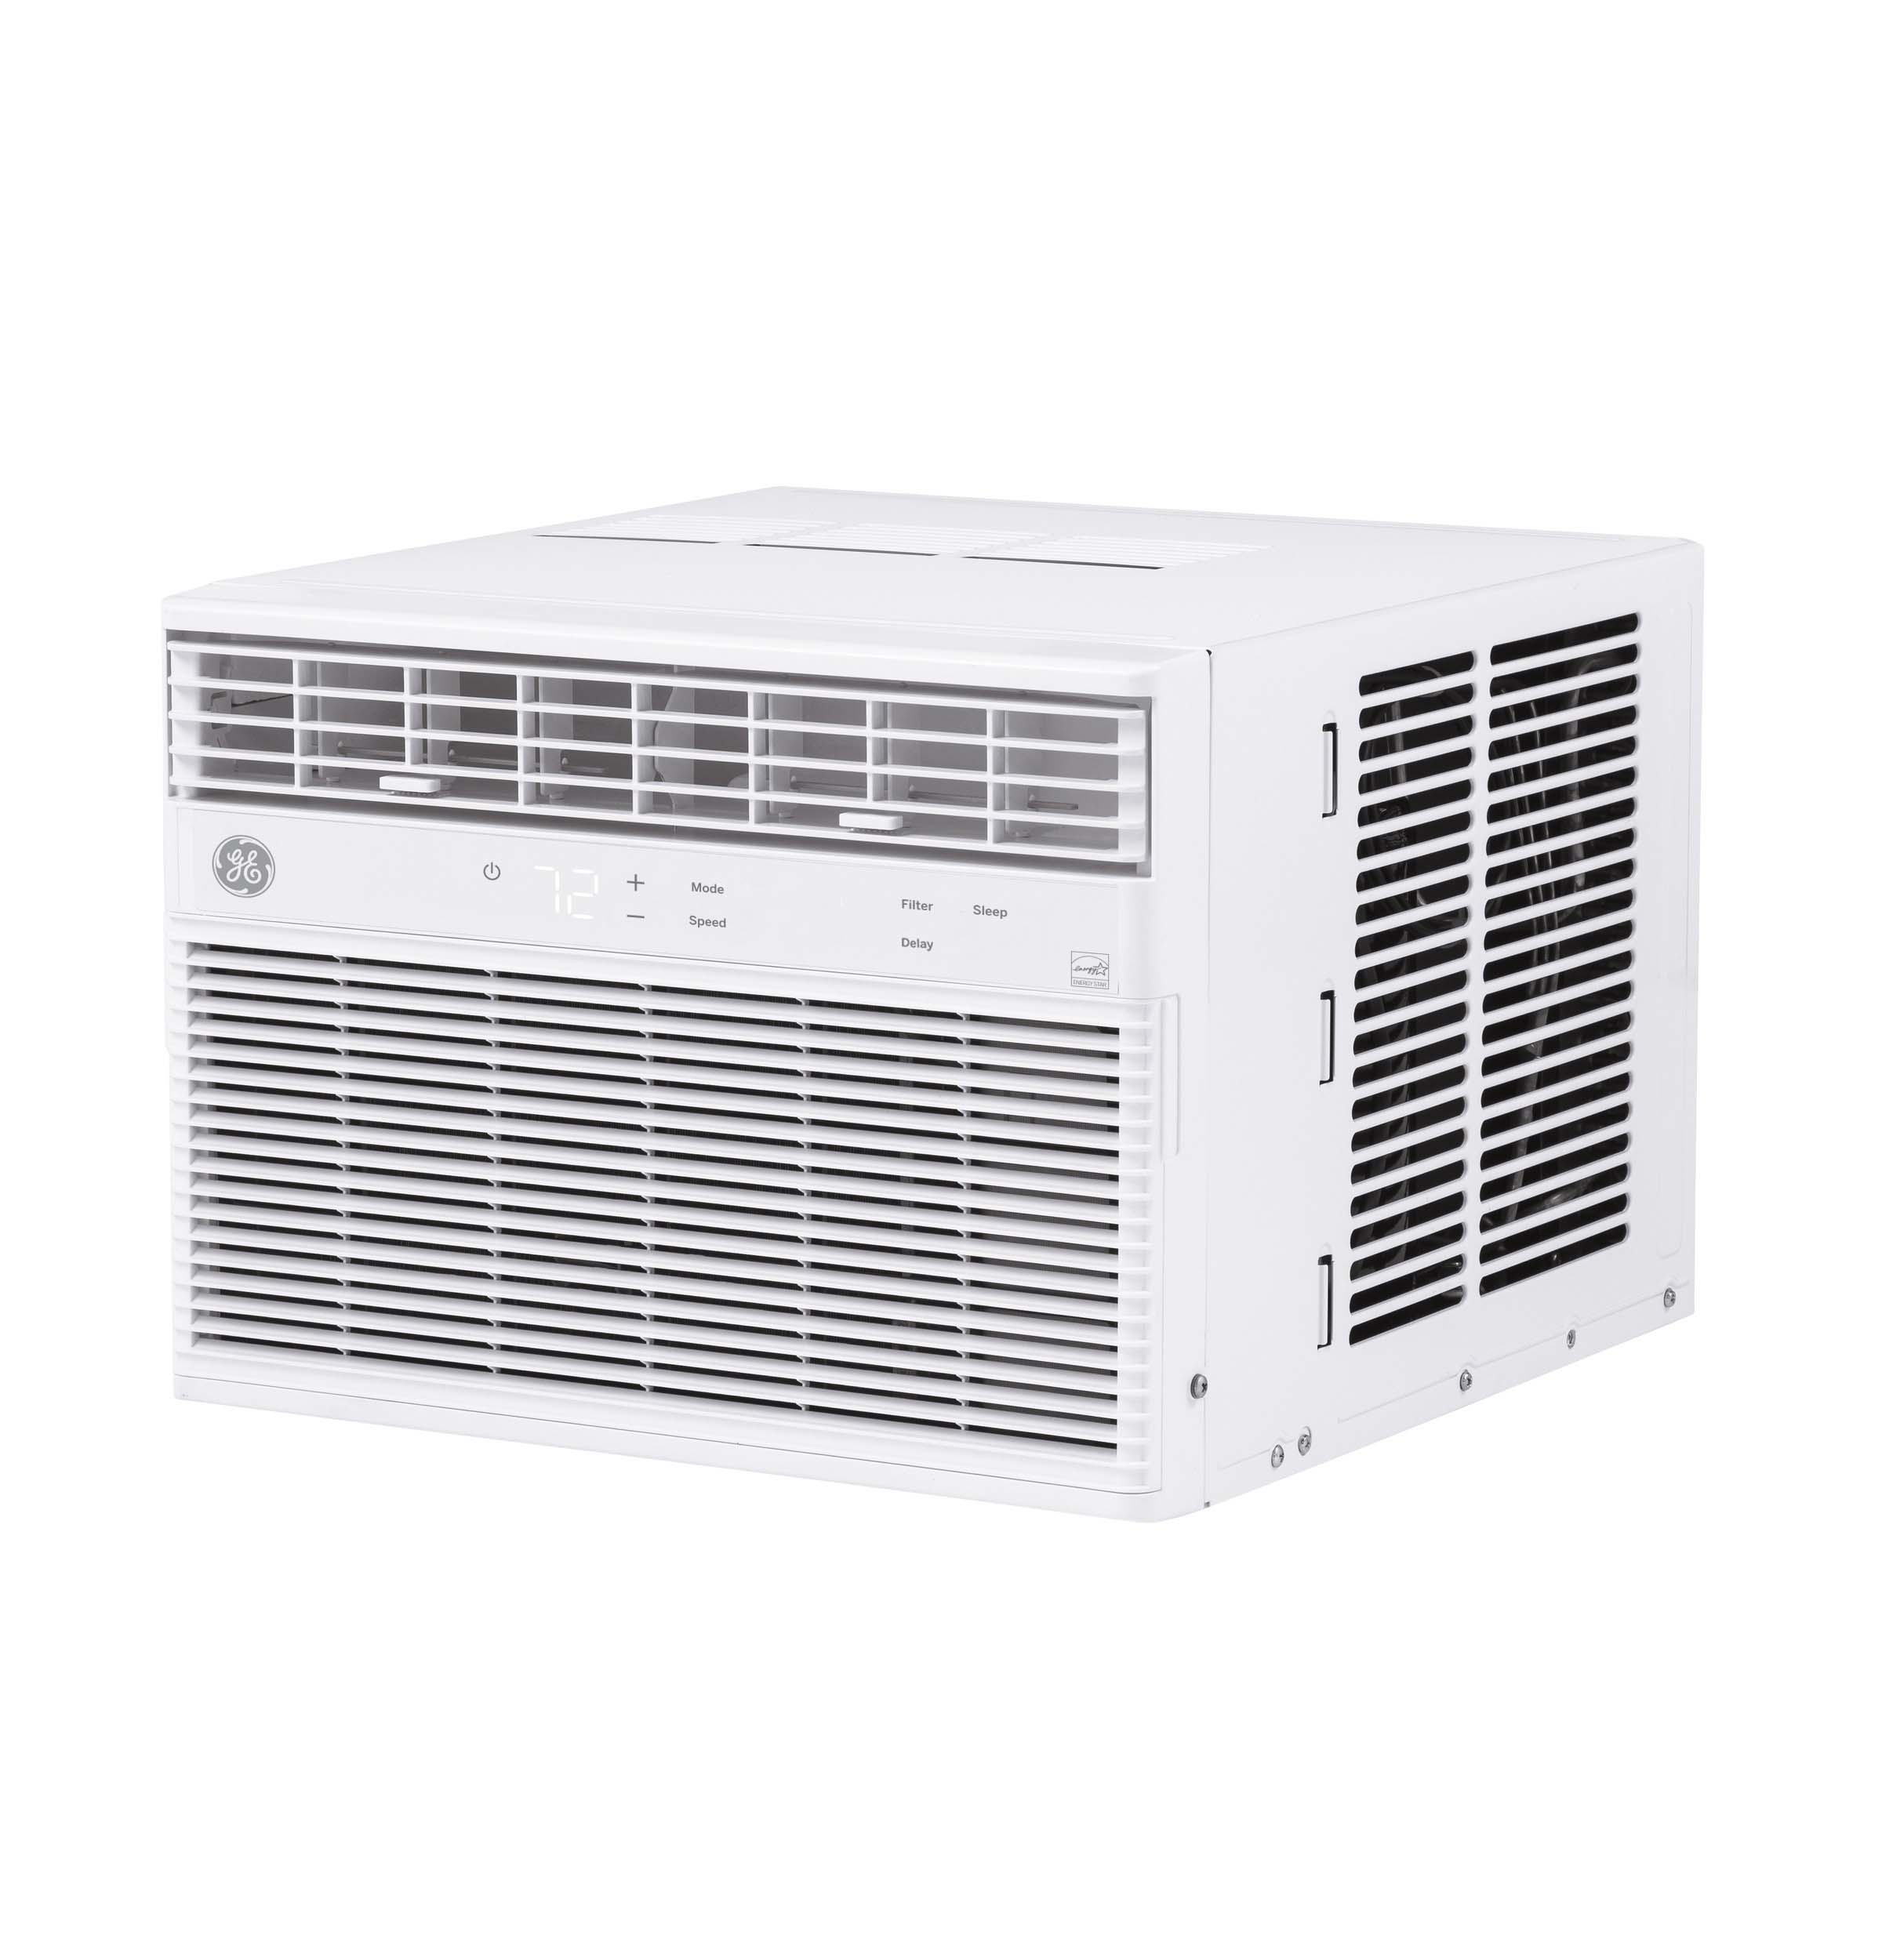 GE® 12,000 BTU Heat/Cool Electronic Window Air Conditioner for Large Rooms up to 550 sq. ft.